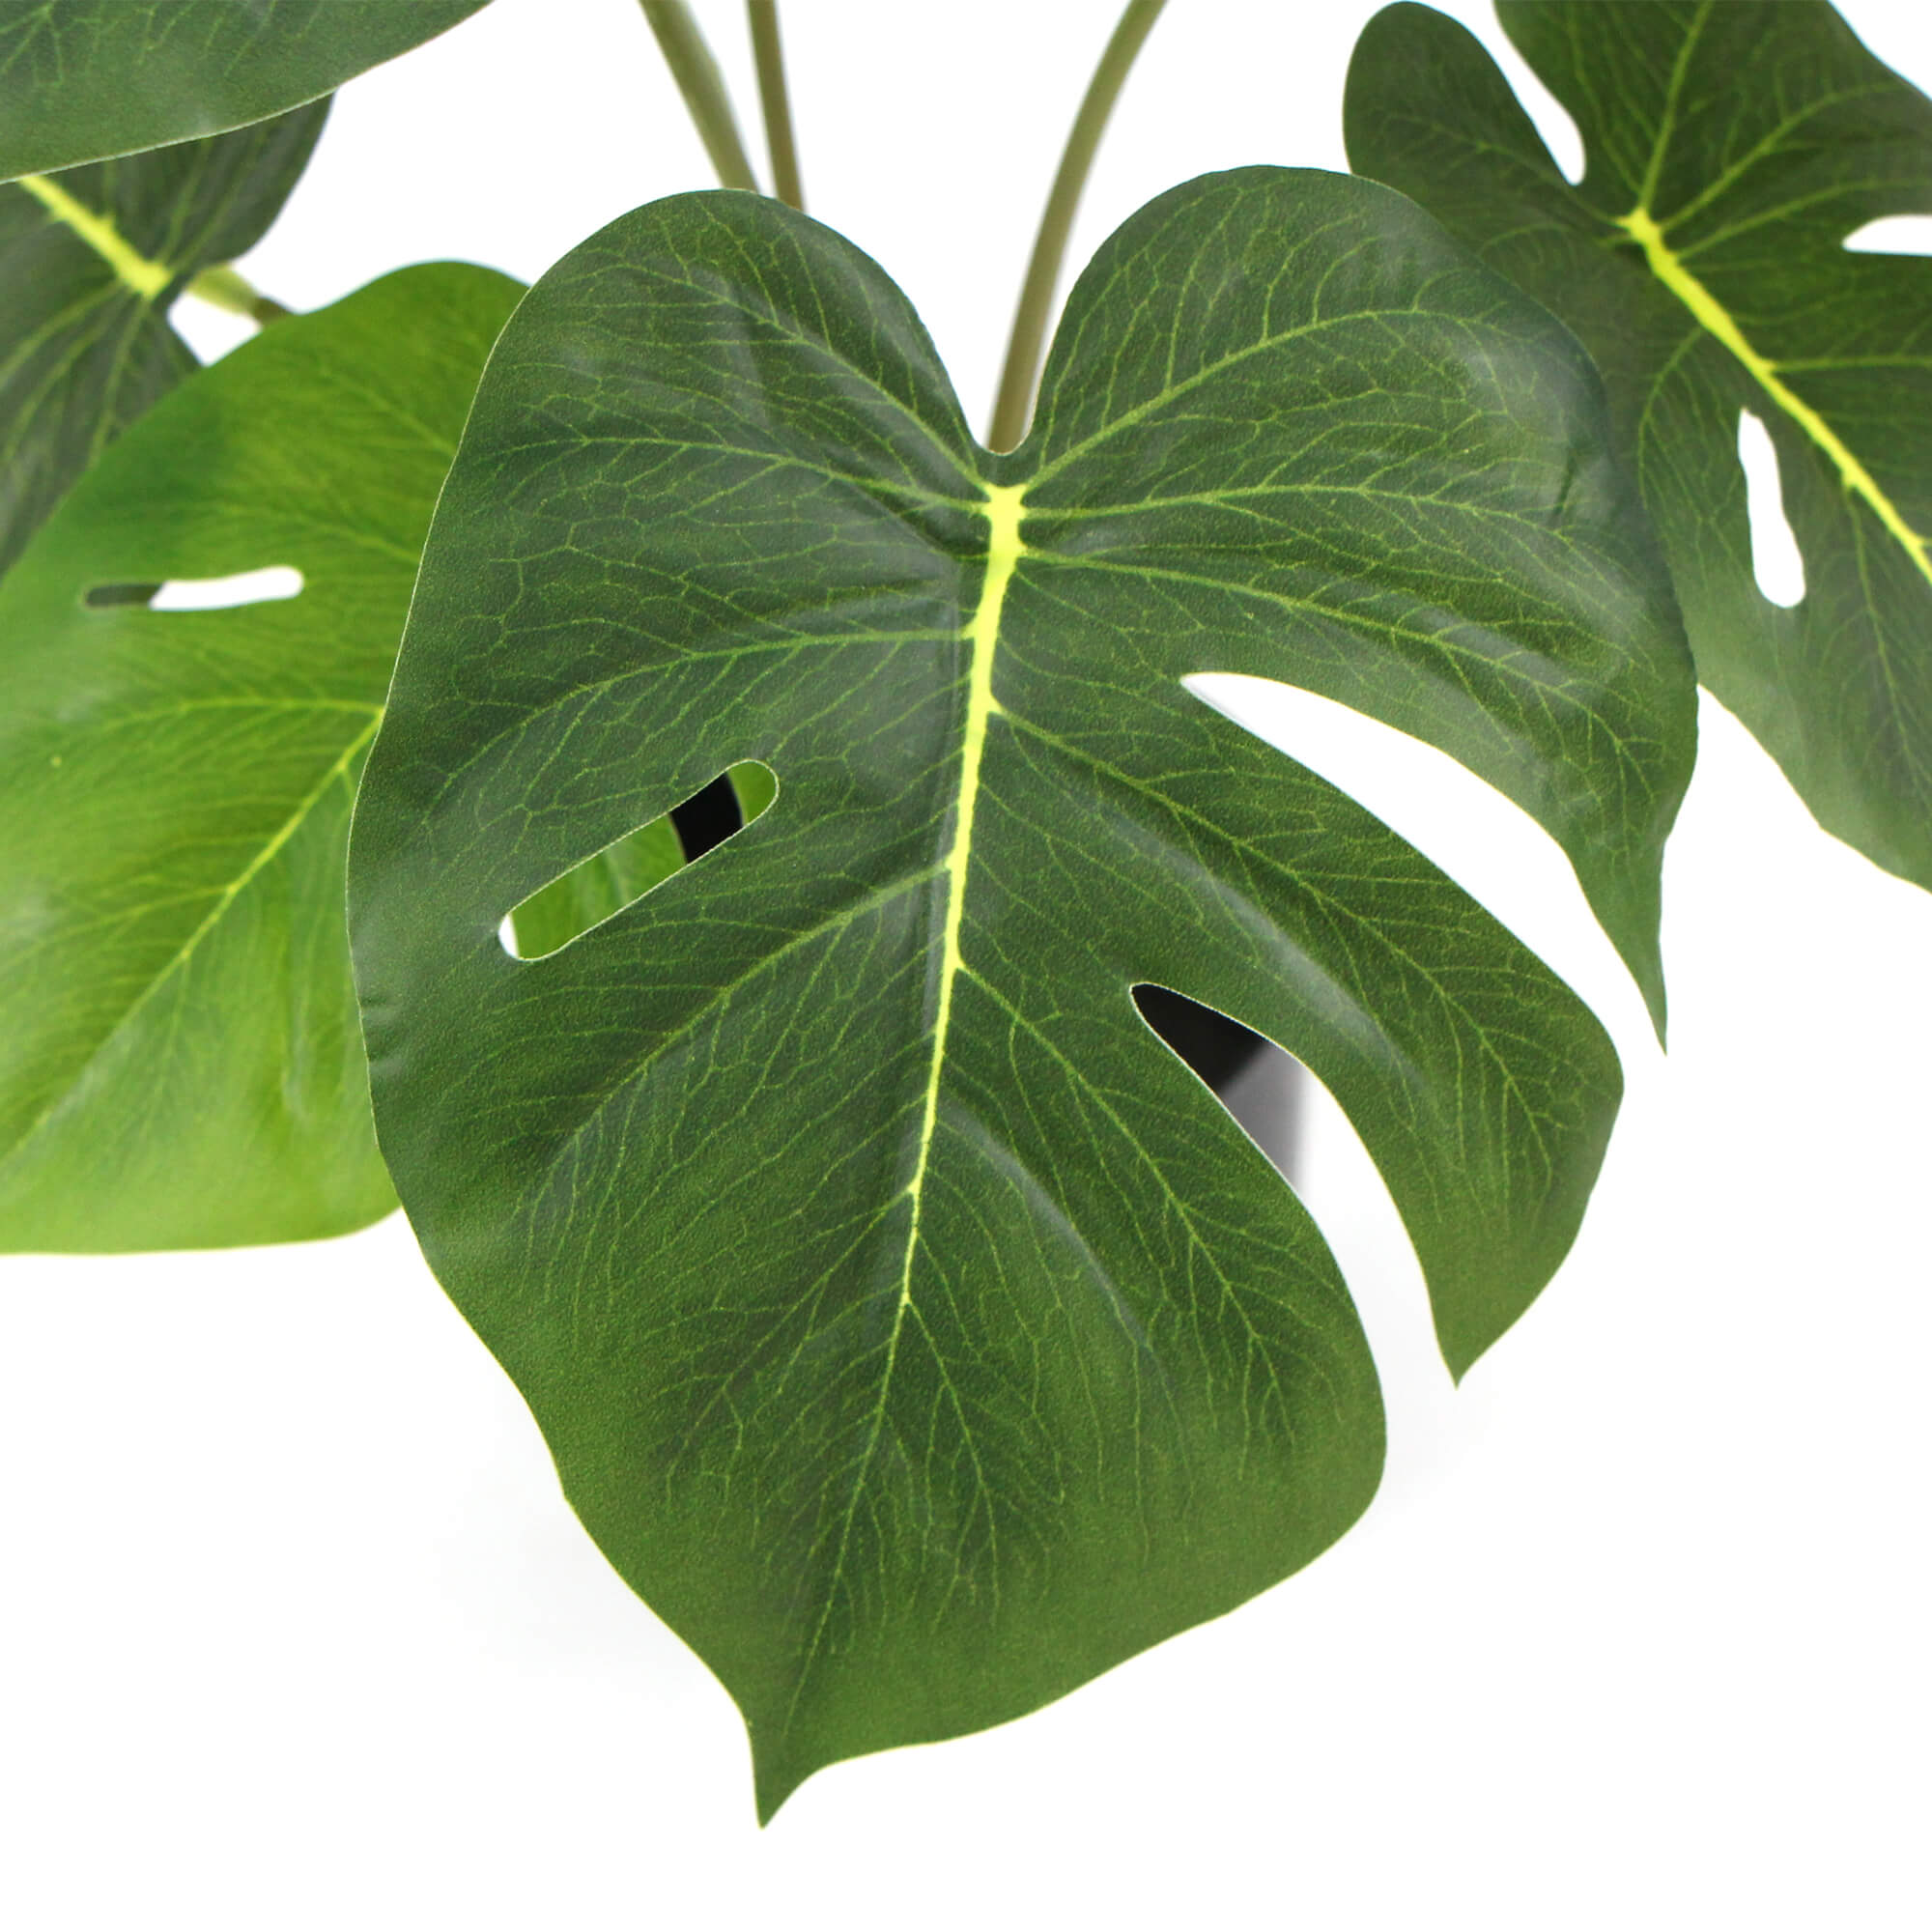 potted-artificial-split-philodendron-plant-with-real-touch-leaves-35cm